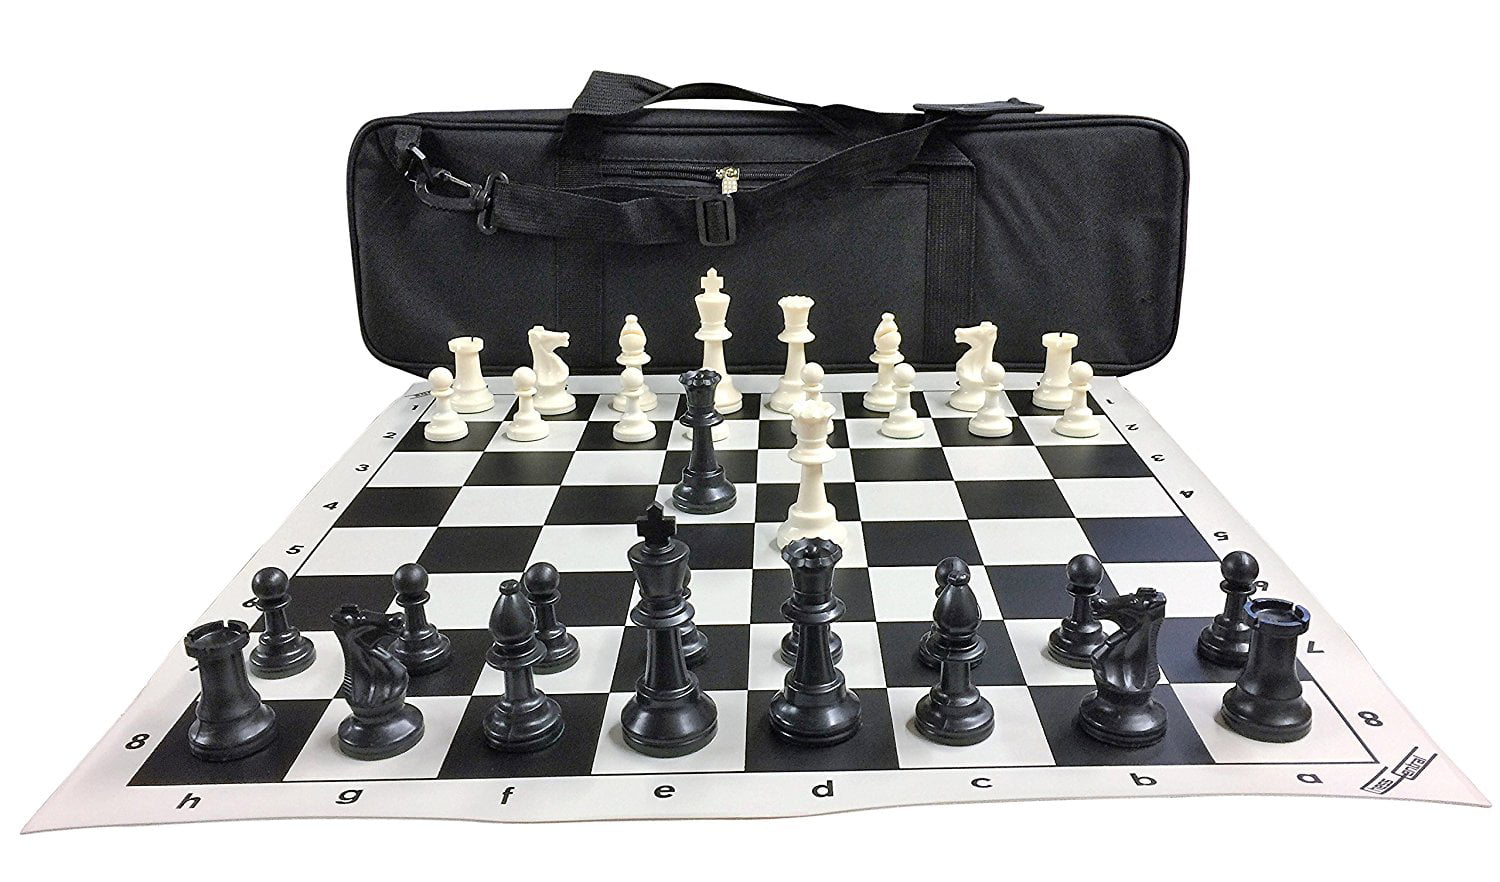 34 Black & White Pieces Black Bag 20" Black Vinyl Board Weighted Chess Set 